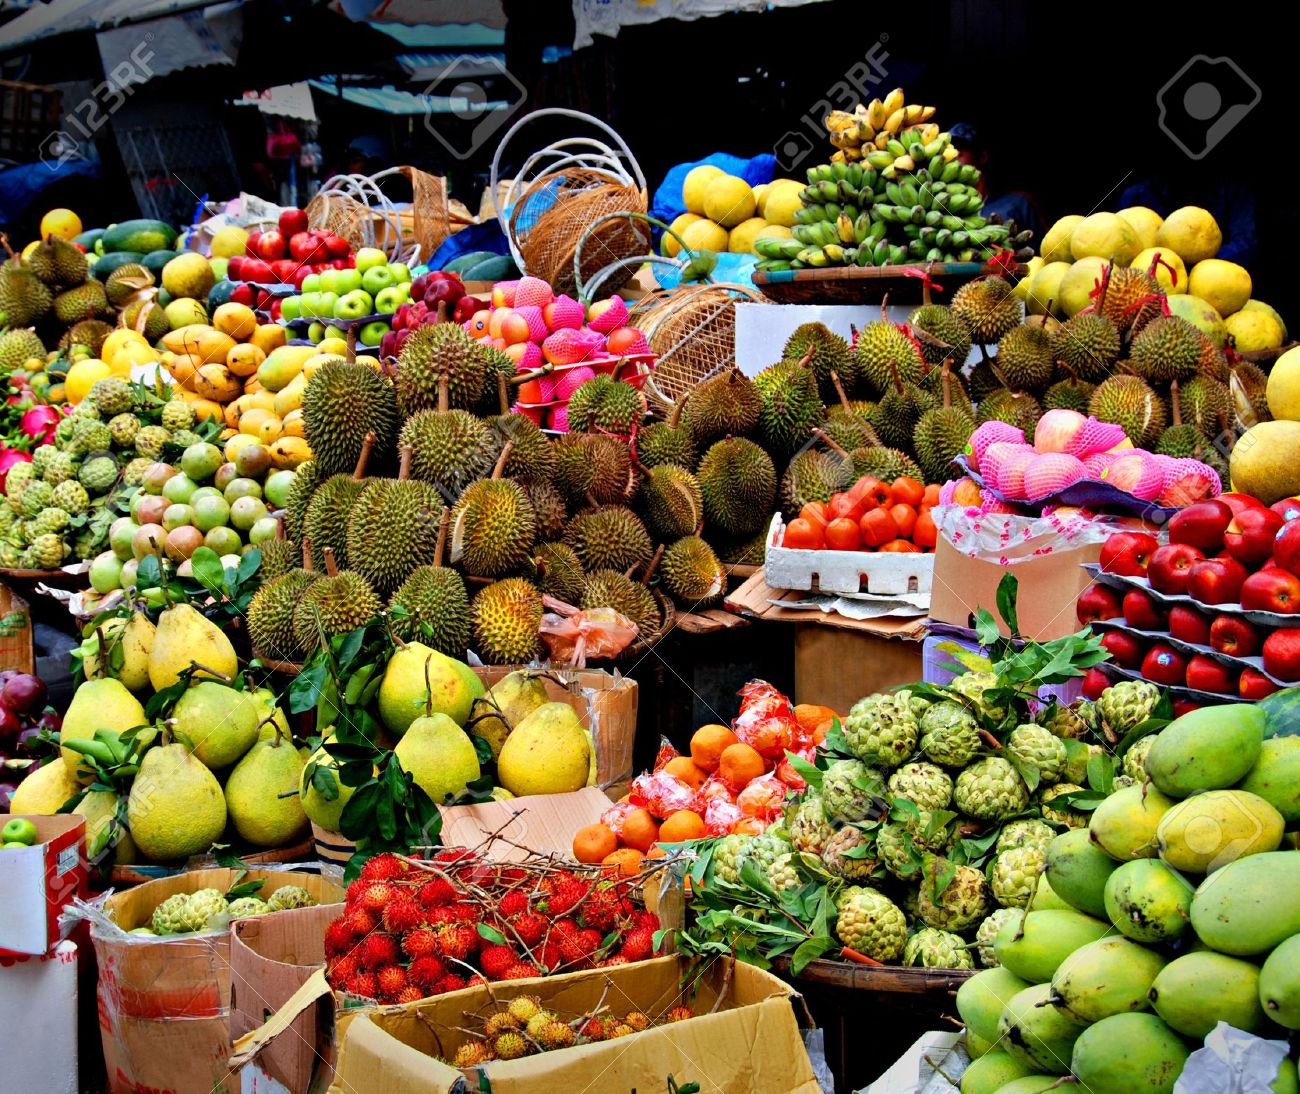 The quest to taste every fruit in the world